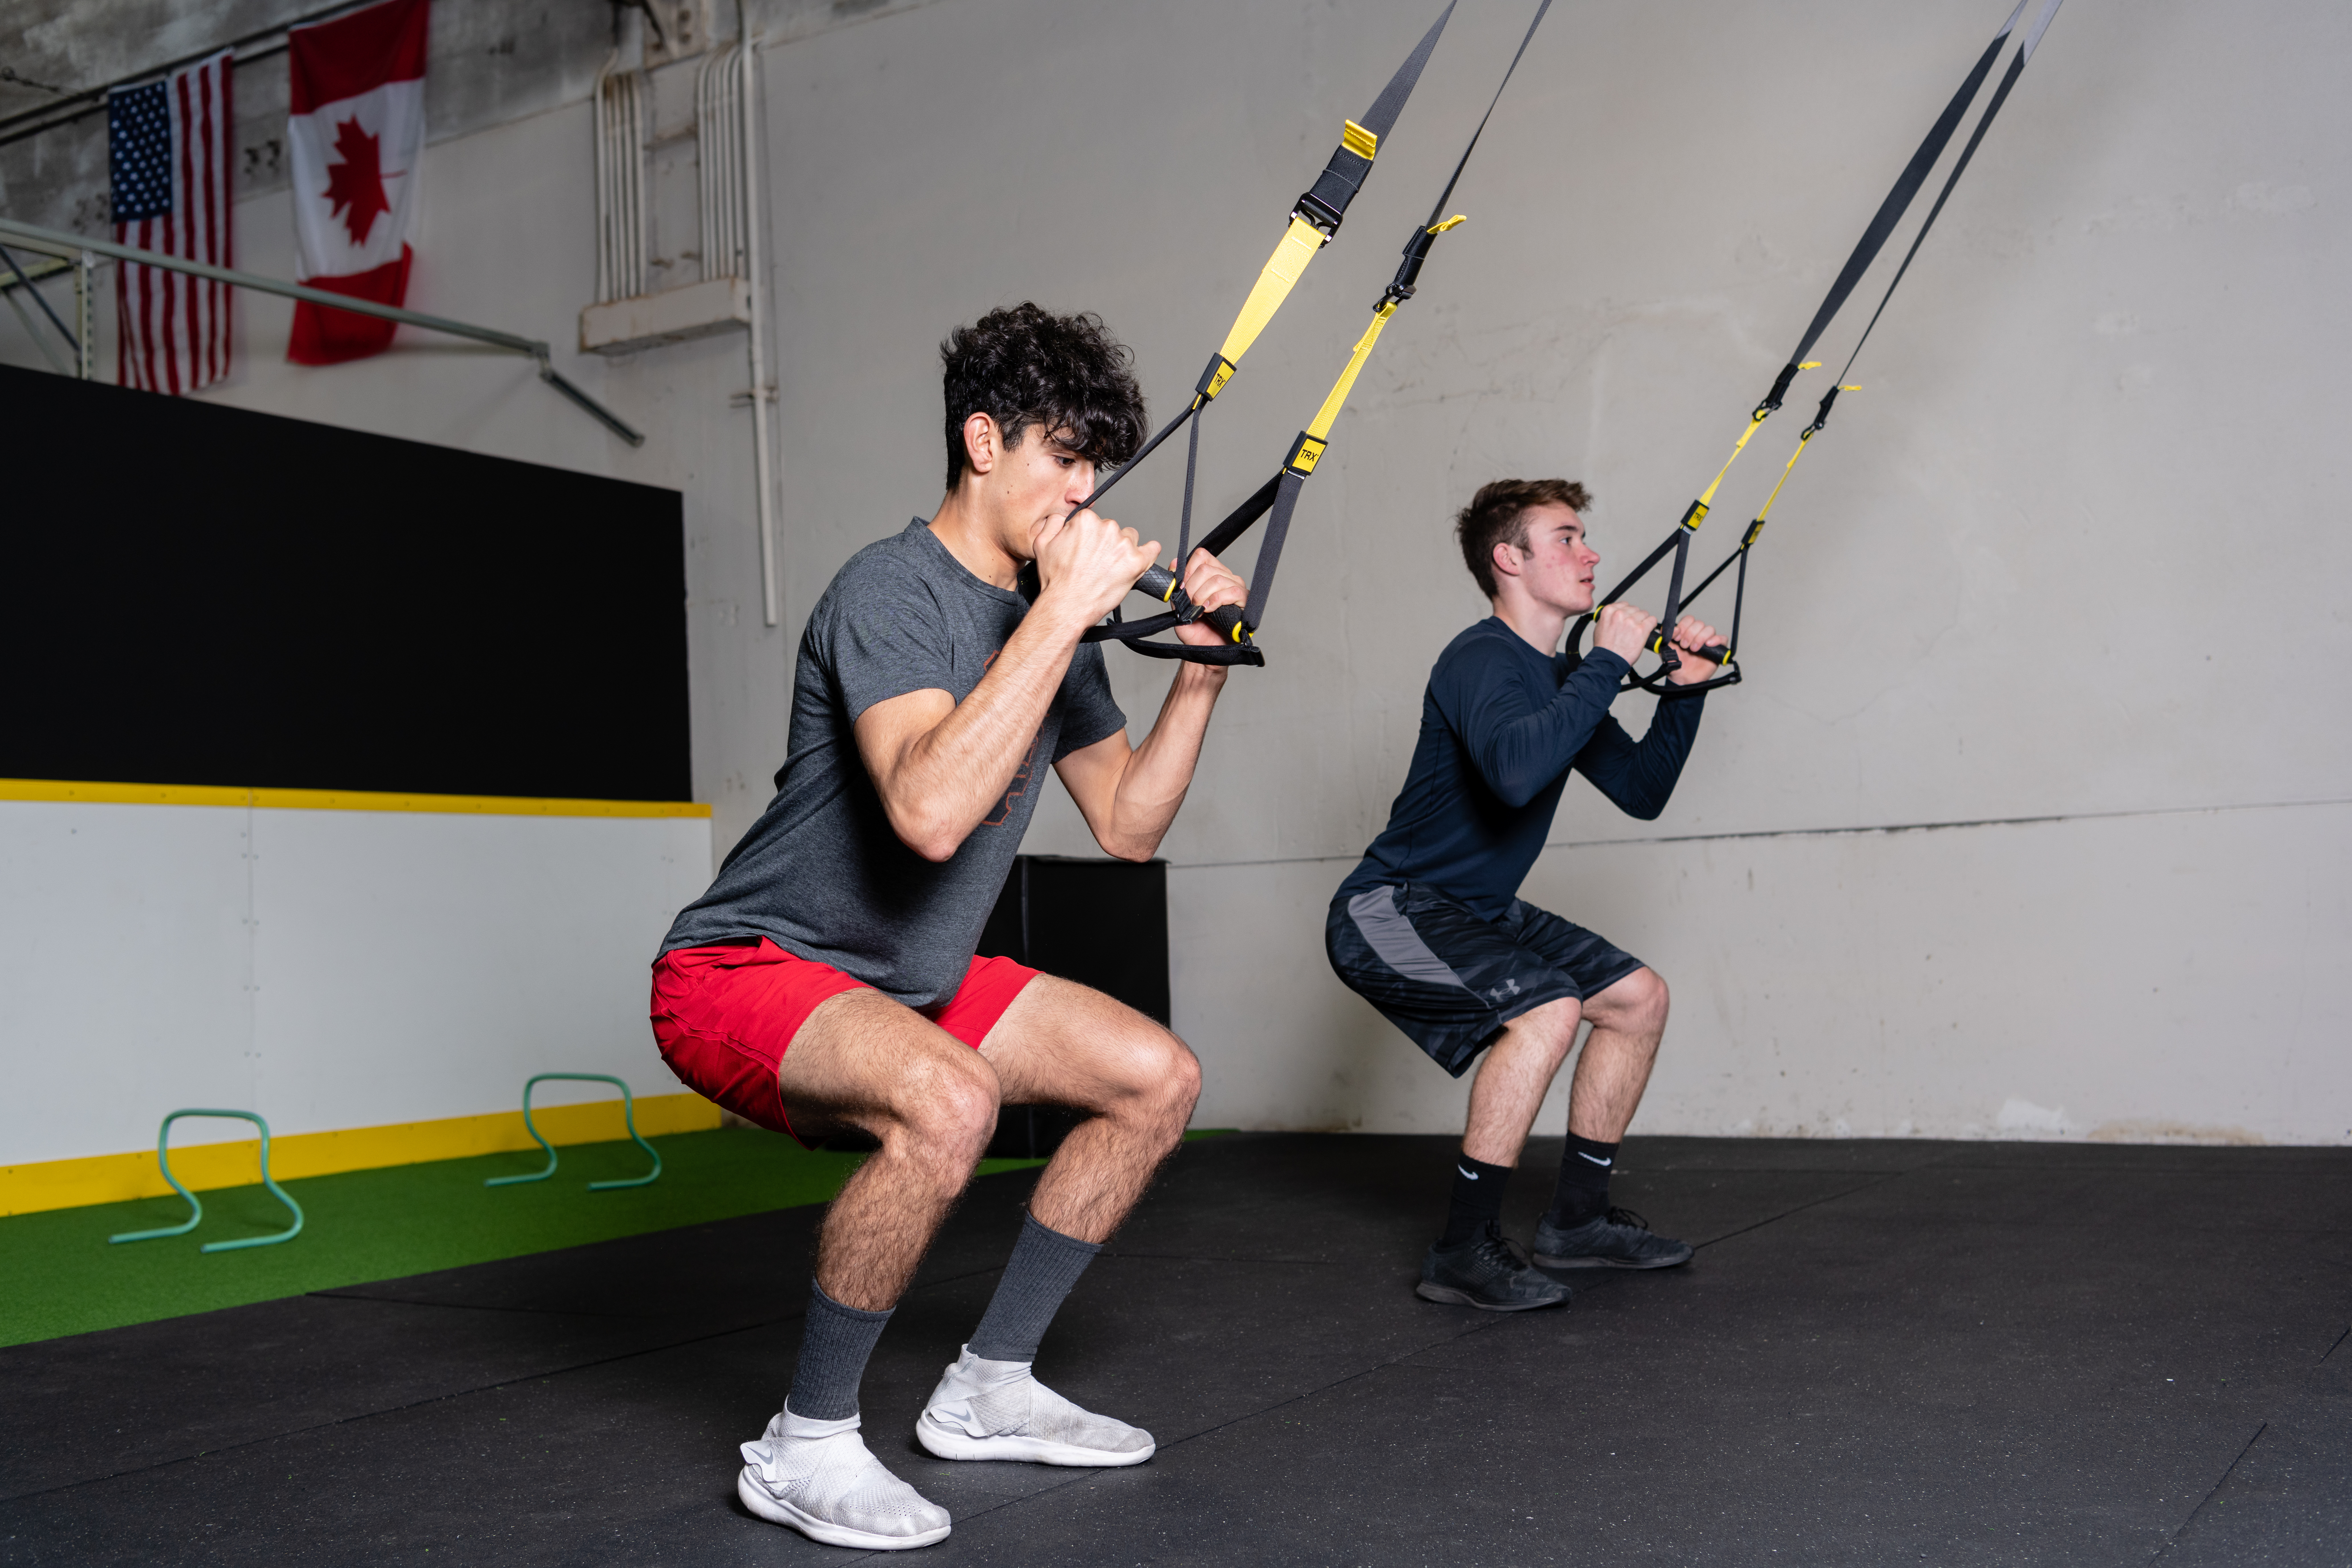 Strength & Conditioning training on TRX system 